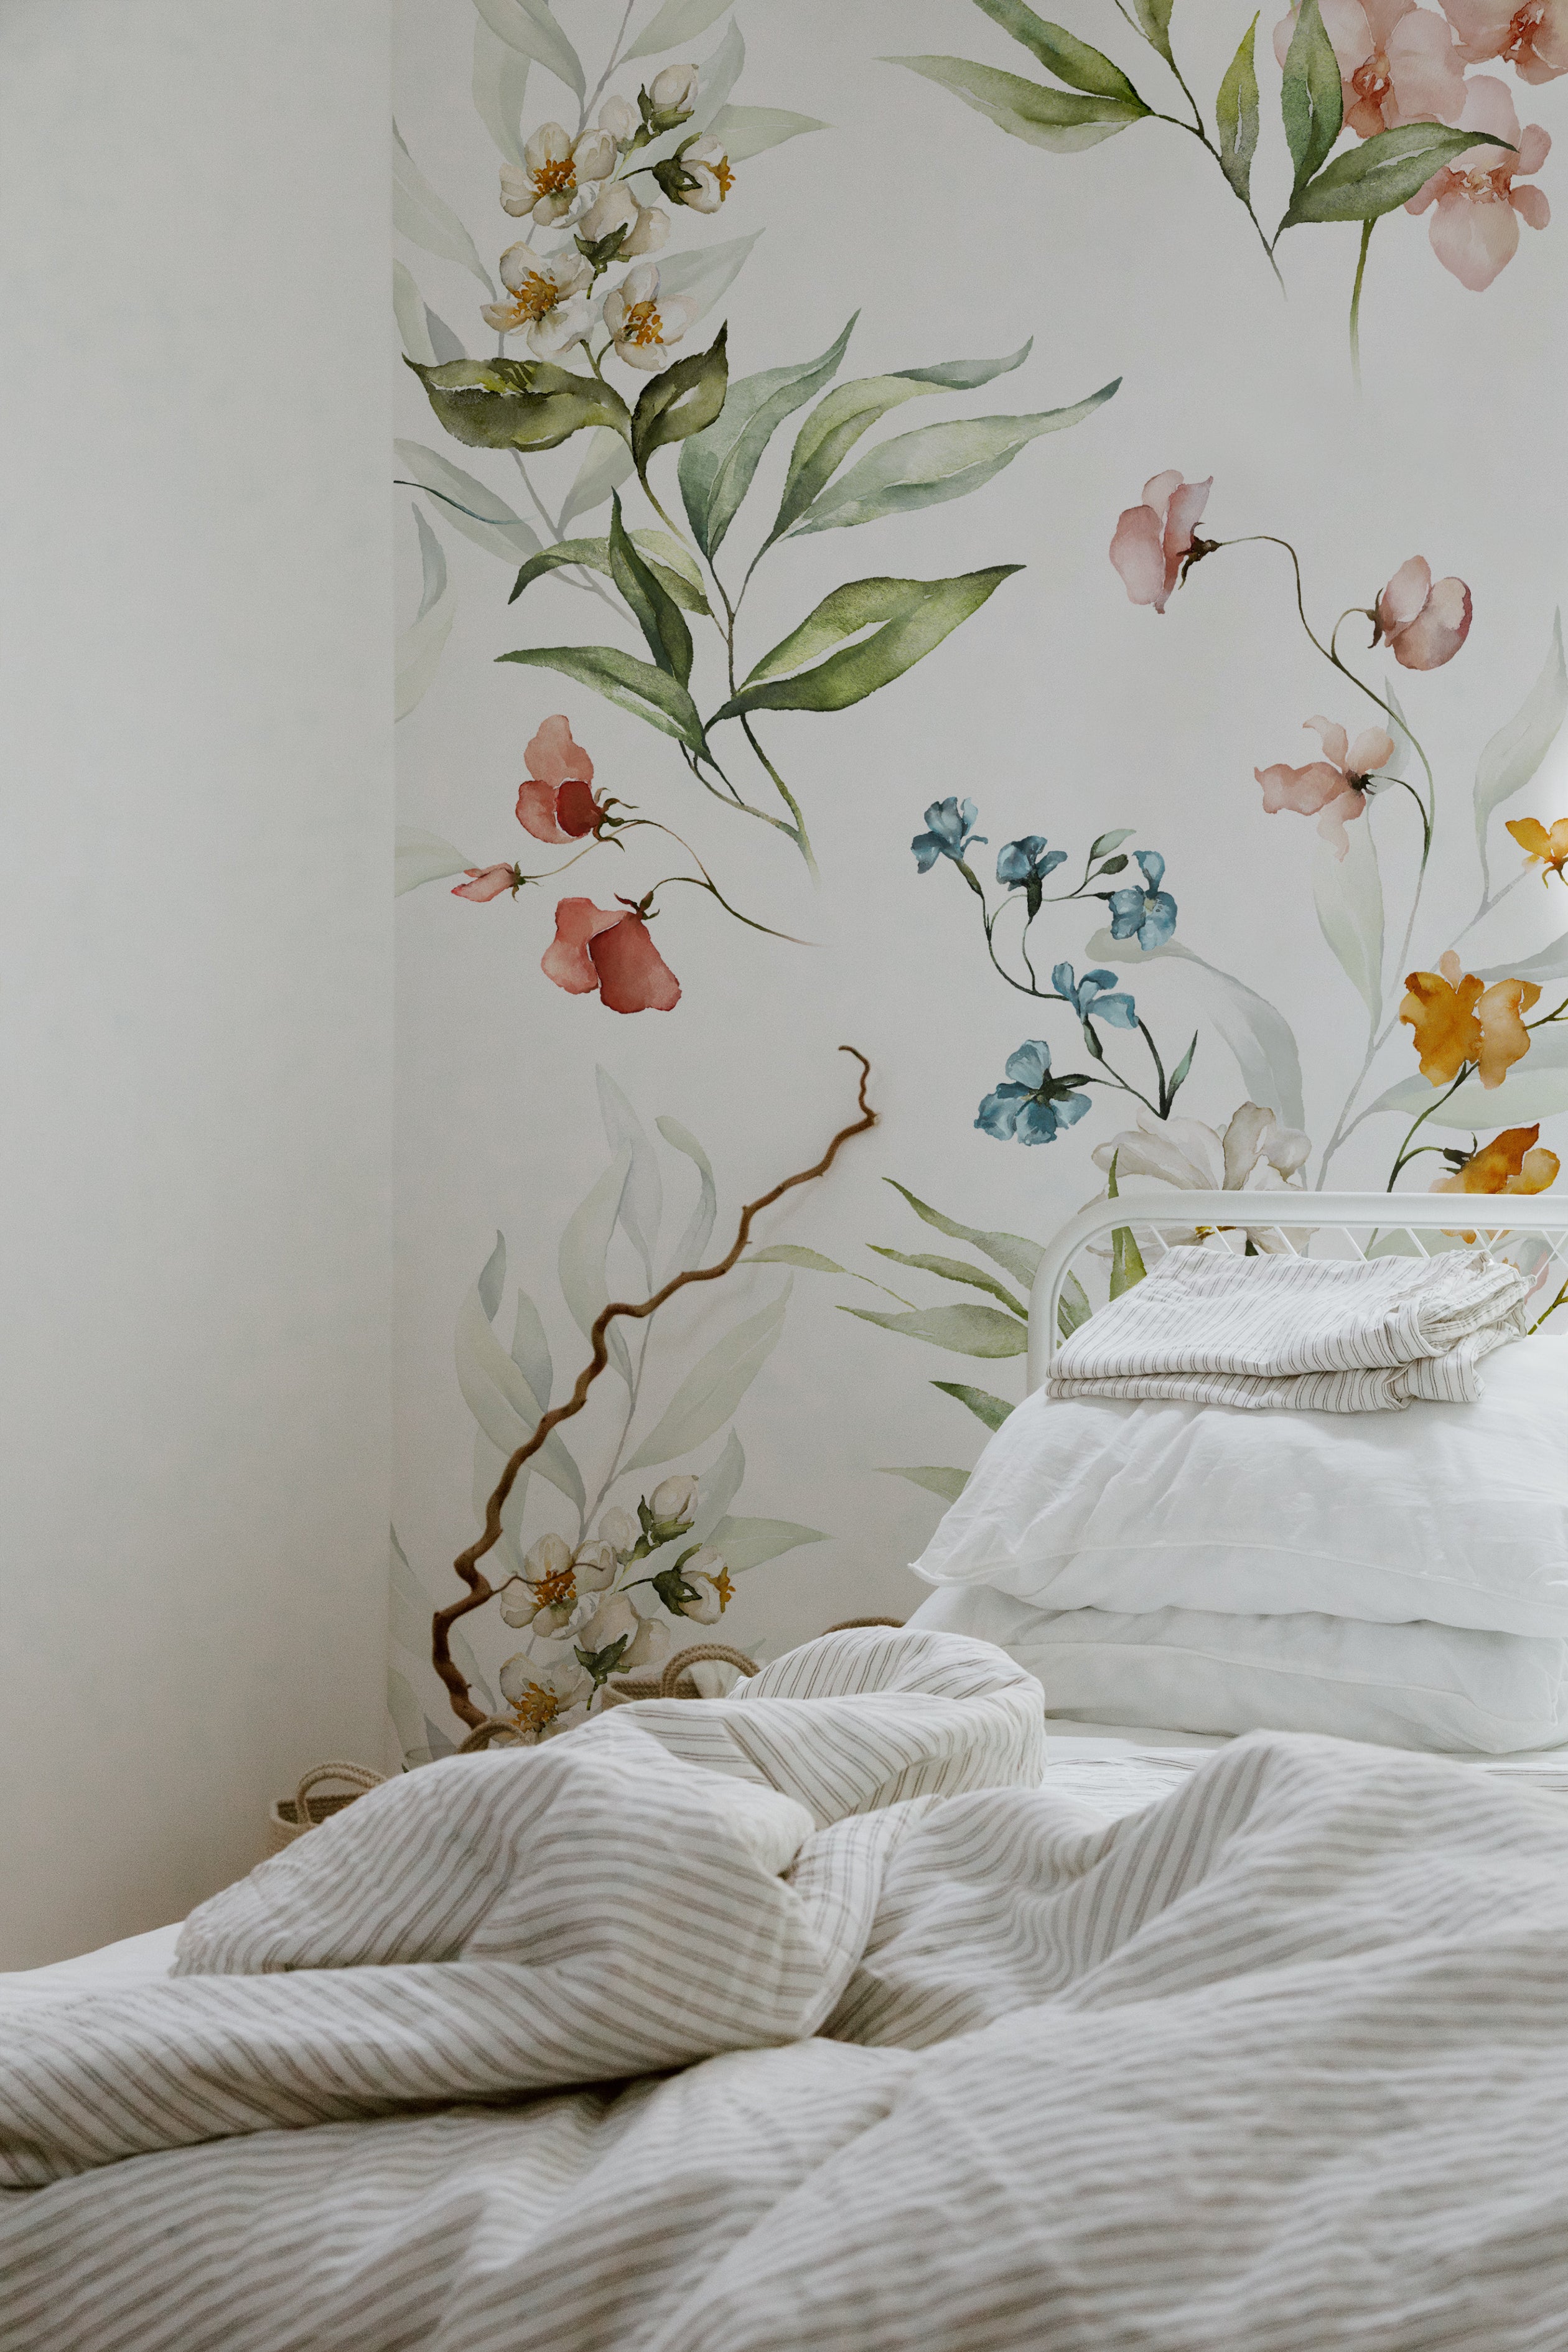 A bedroom wall adorned with a floral wallpaper design showcasing watercolor illustrations of flowers and leaves. The pattern features soft pink, blue, yellow, and white flowers with green foliage, adding a touch of nature to the room's decor. The bed in the foreground has white linens and striped bedding